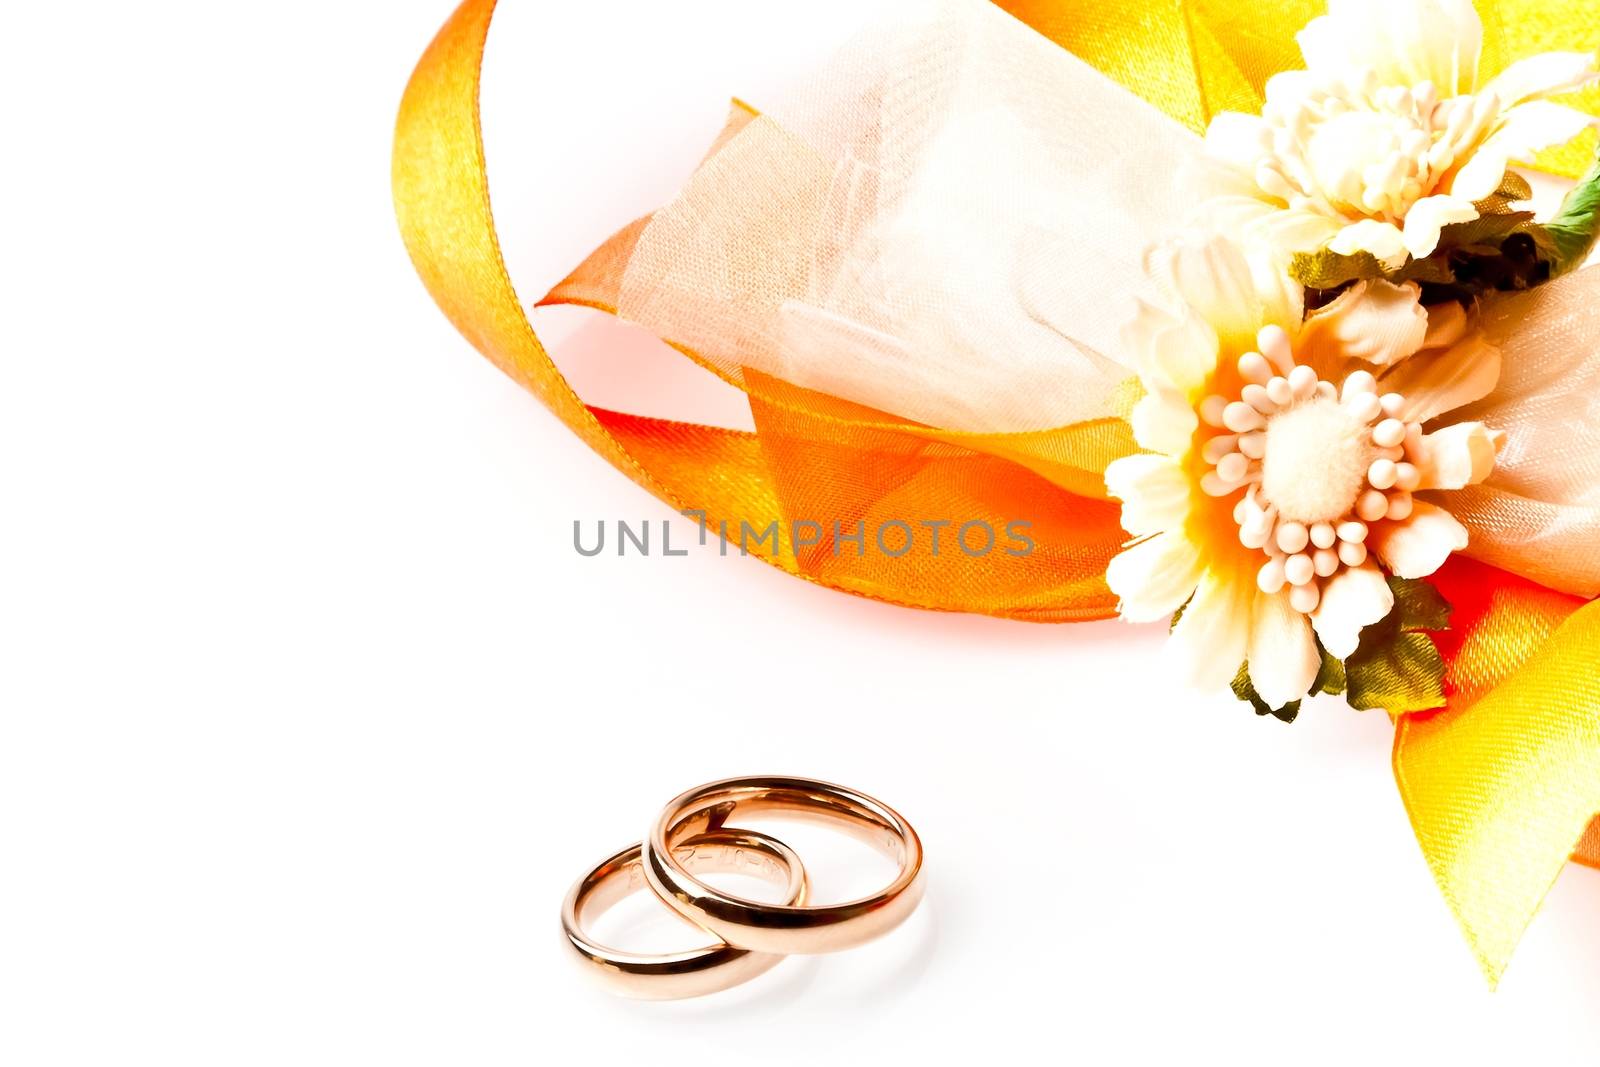 gold wedding rings near ribbon and flowers with space for text by donfiore